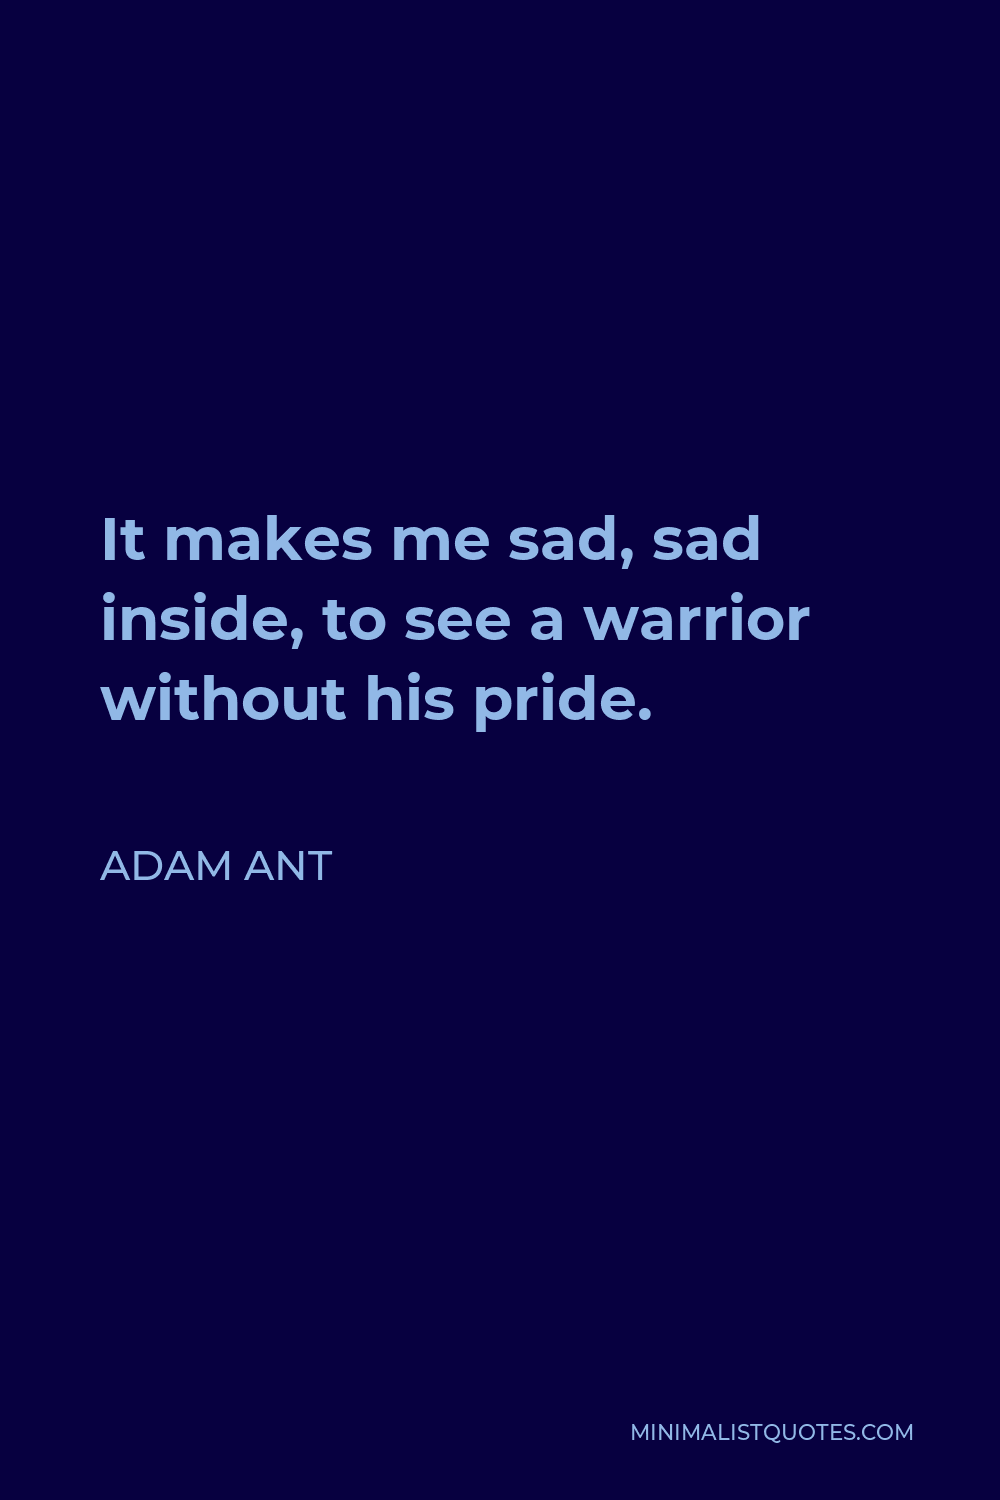 Adam Ant Quote - It makes me sad, sad inside, to see a warrior without his pride.